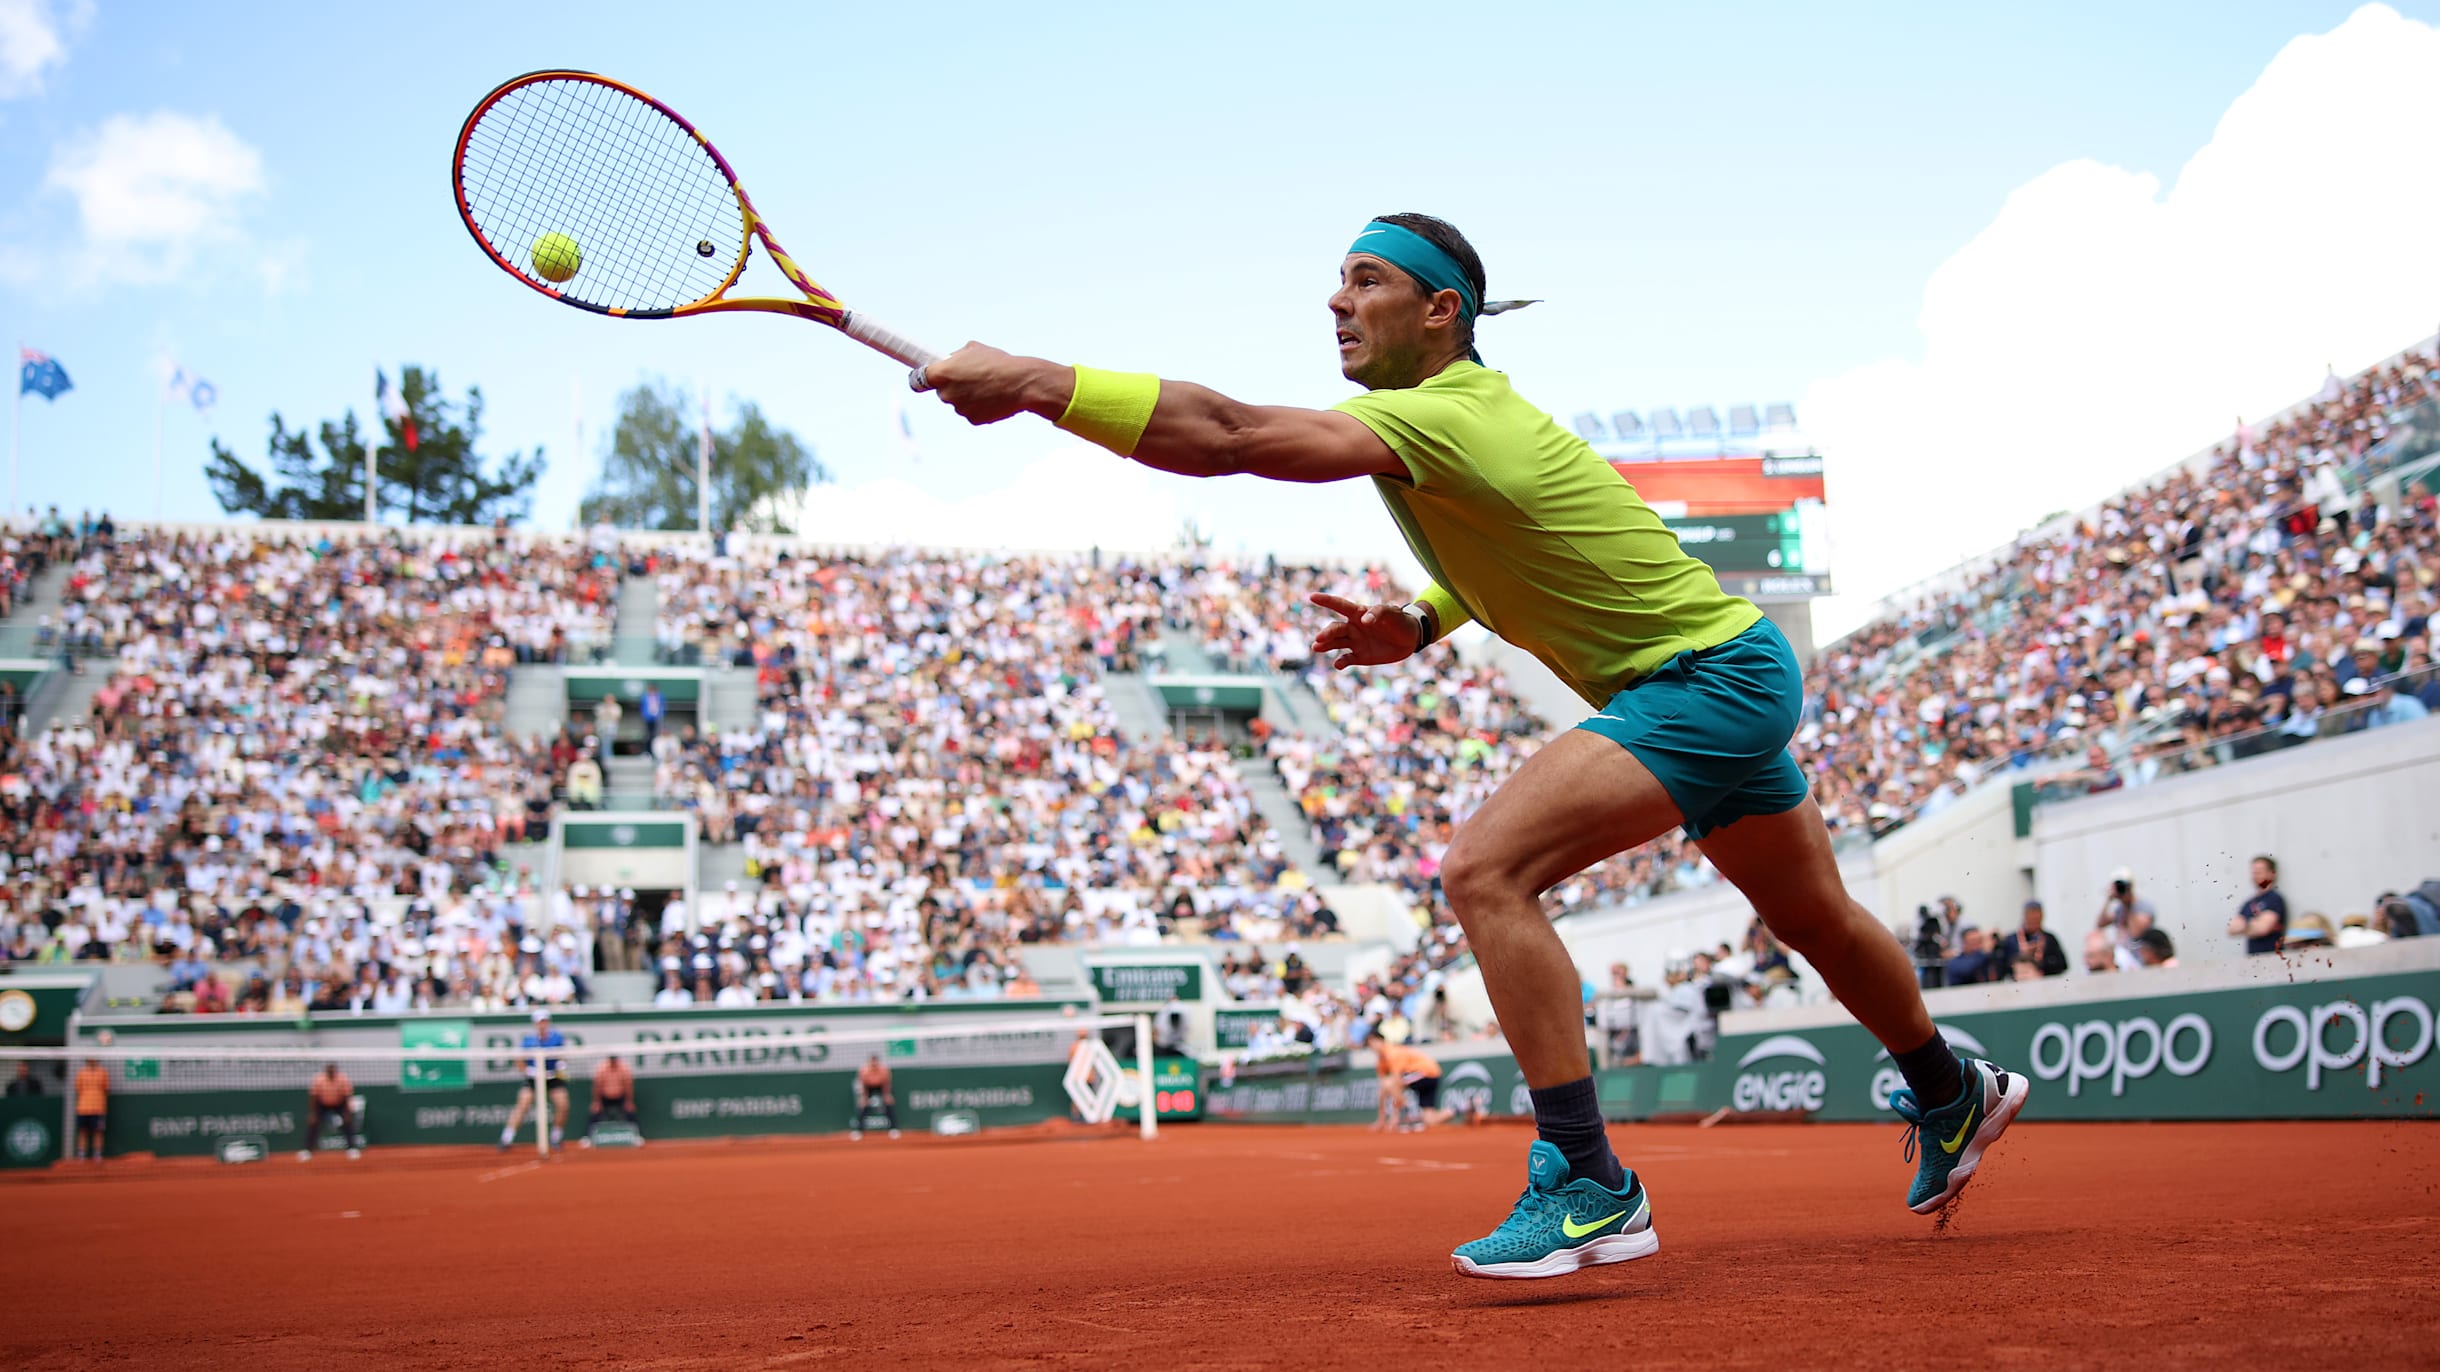 Rafa Nadal: The first goal is to try to compete, I'm going day by day